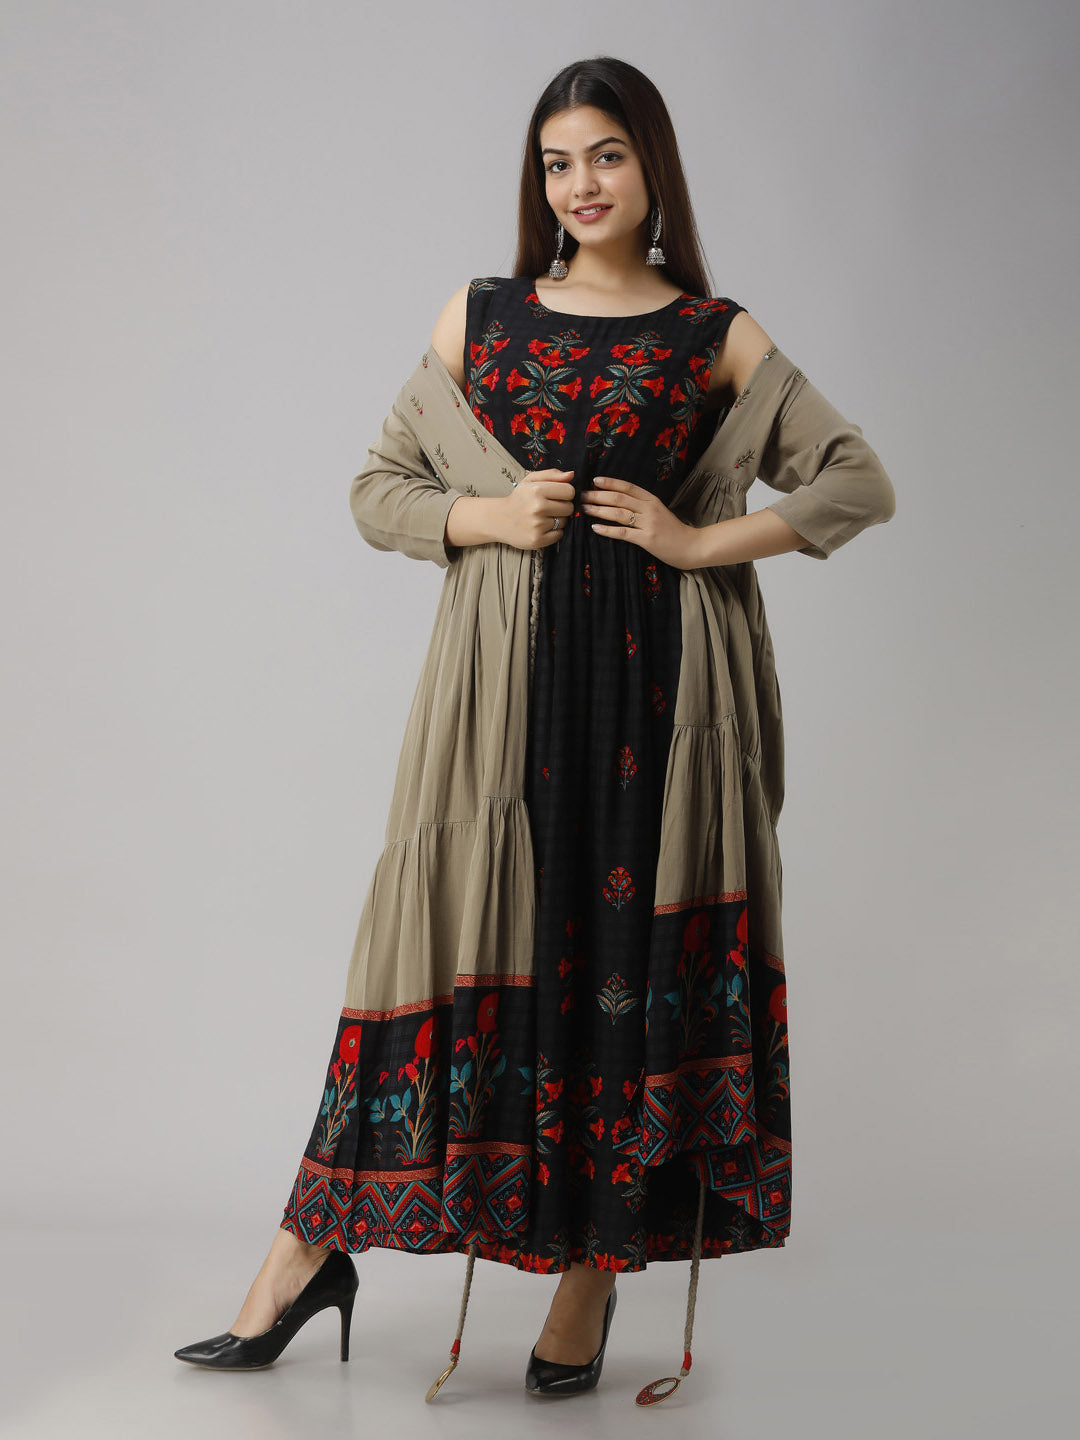 Details more than 207 floor length kurtis with jacket